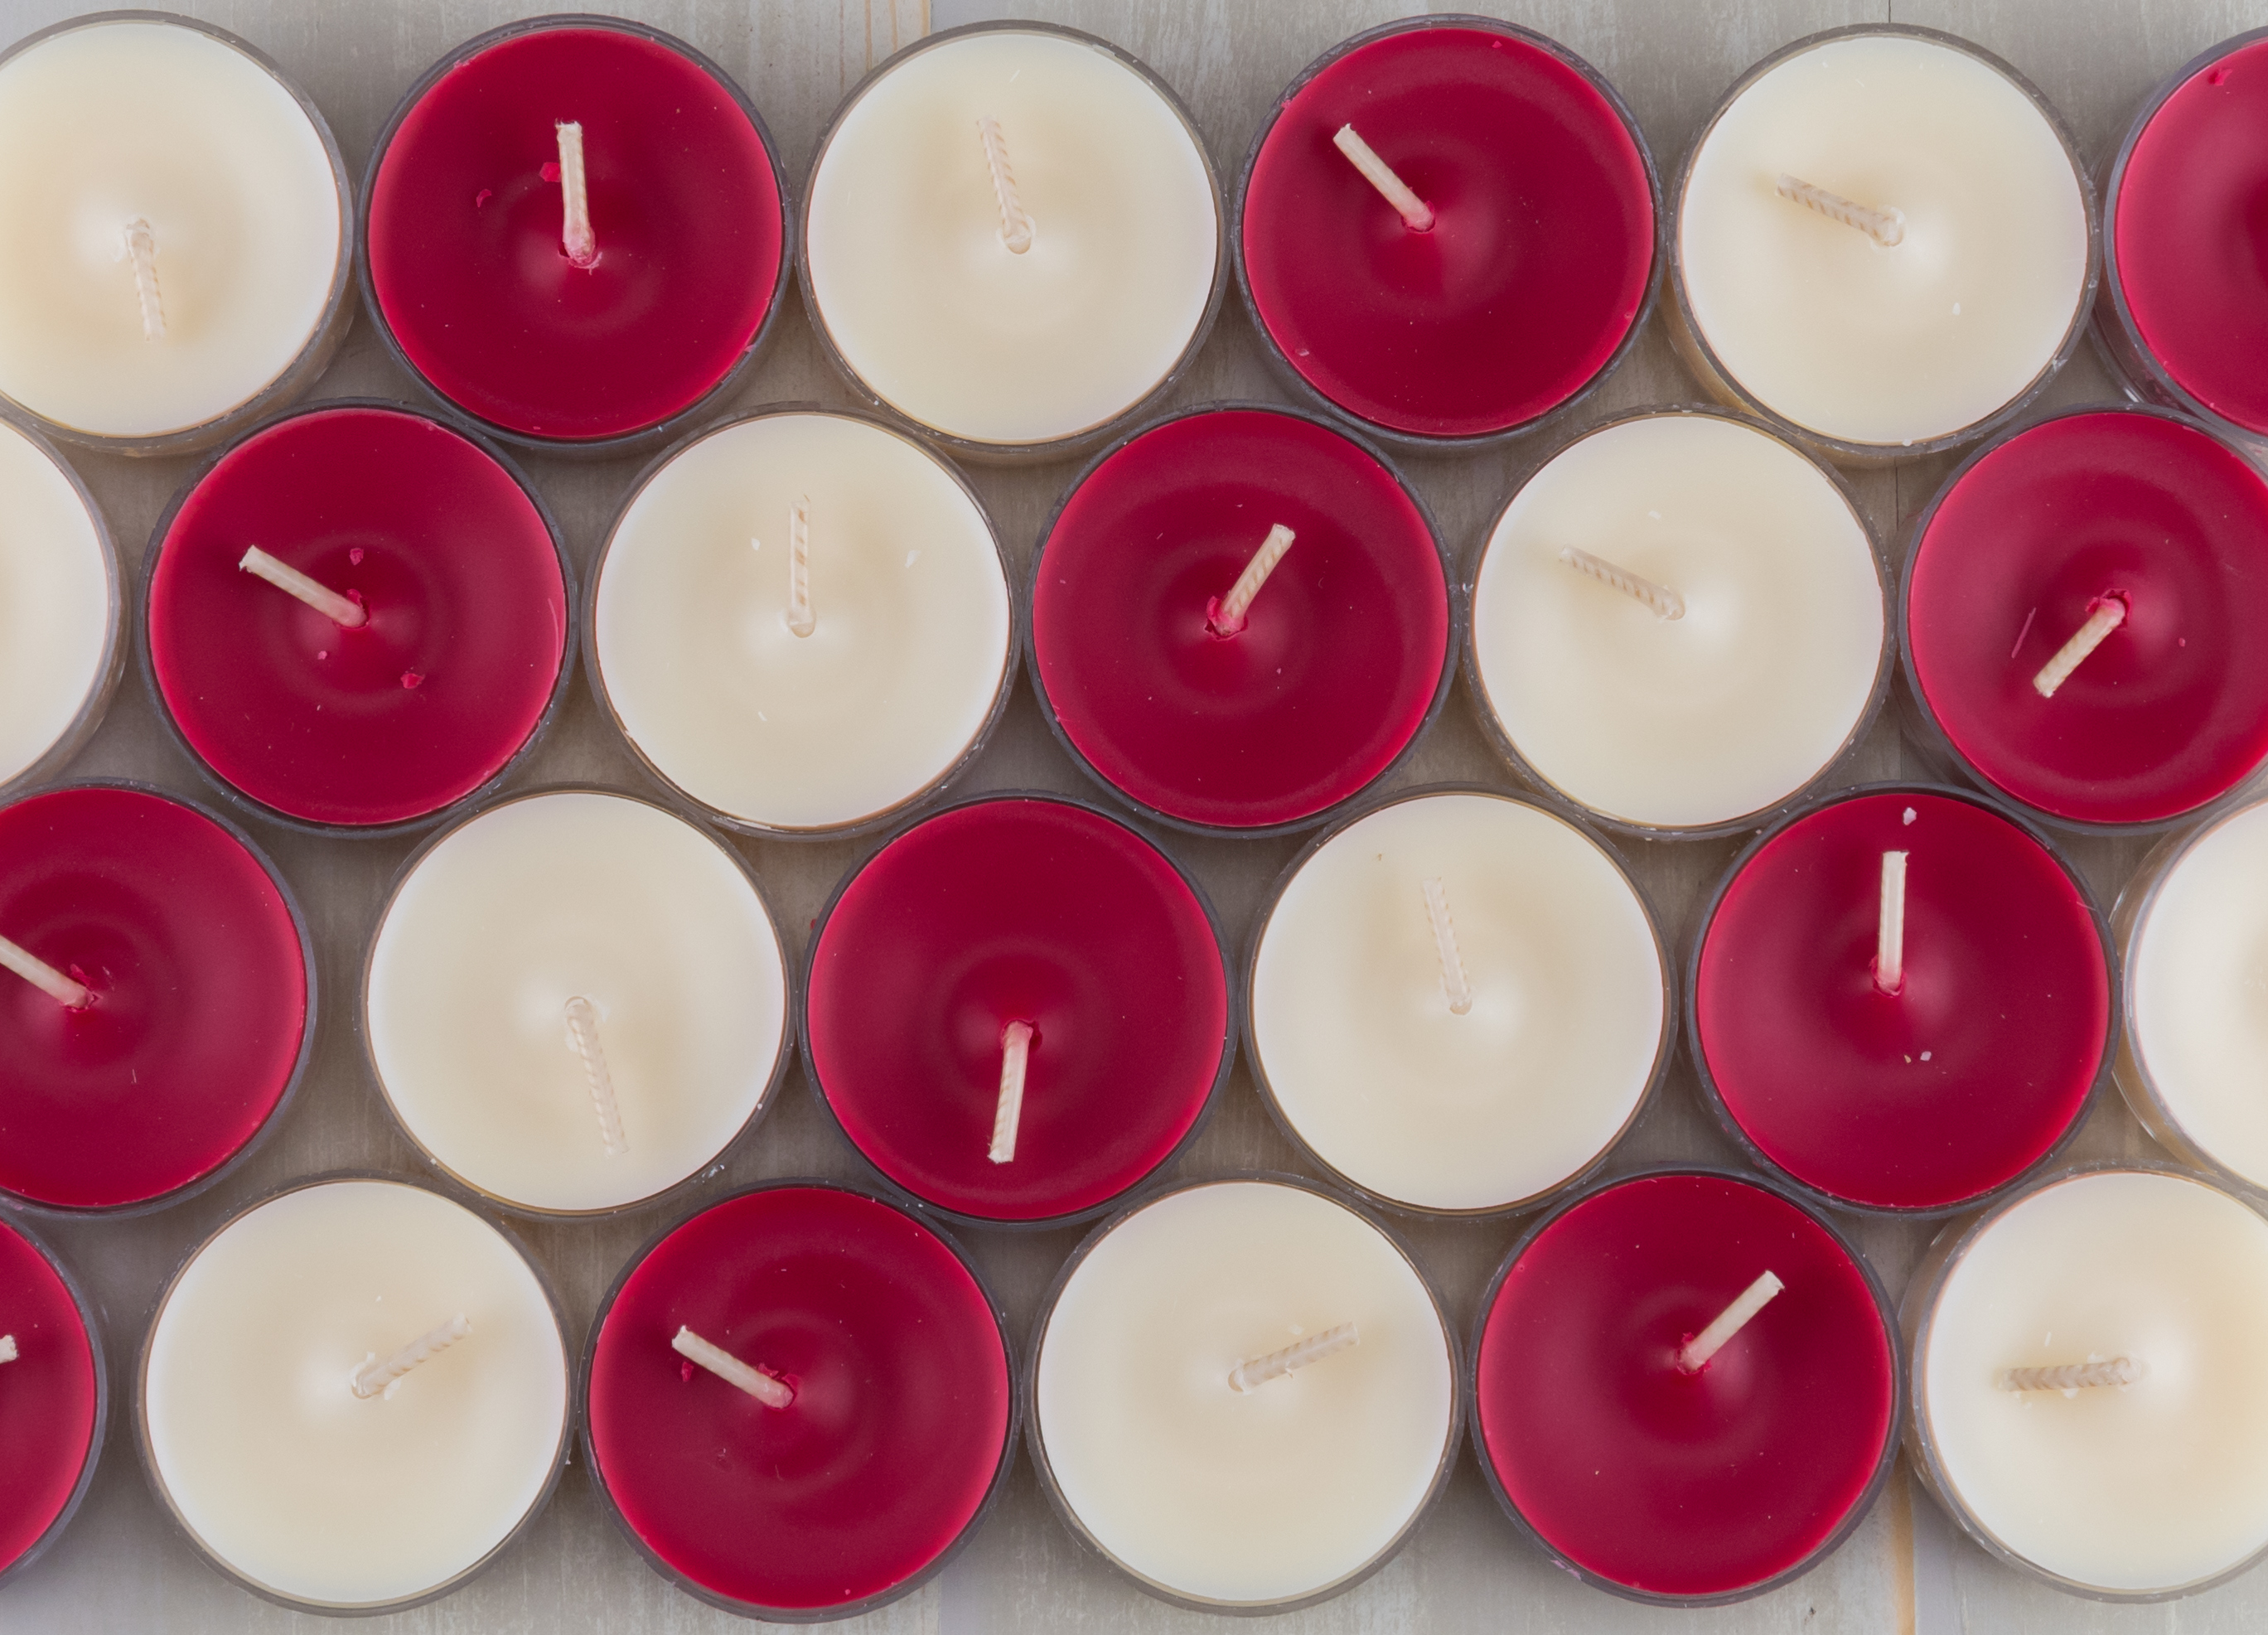 Rows of candles